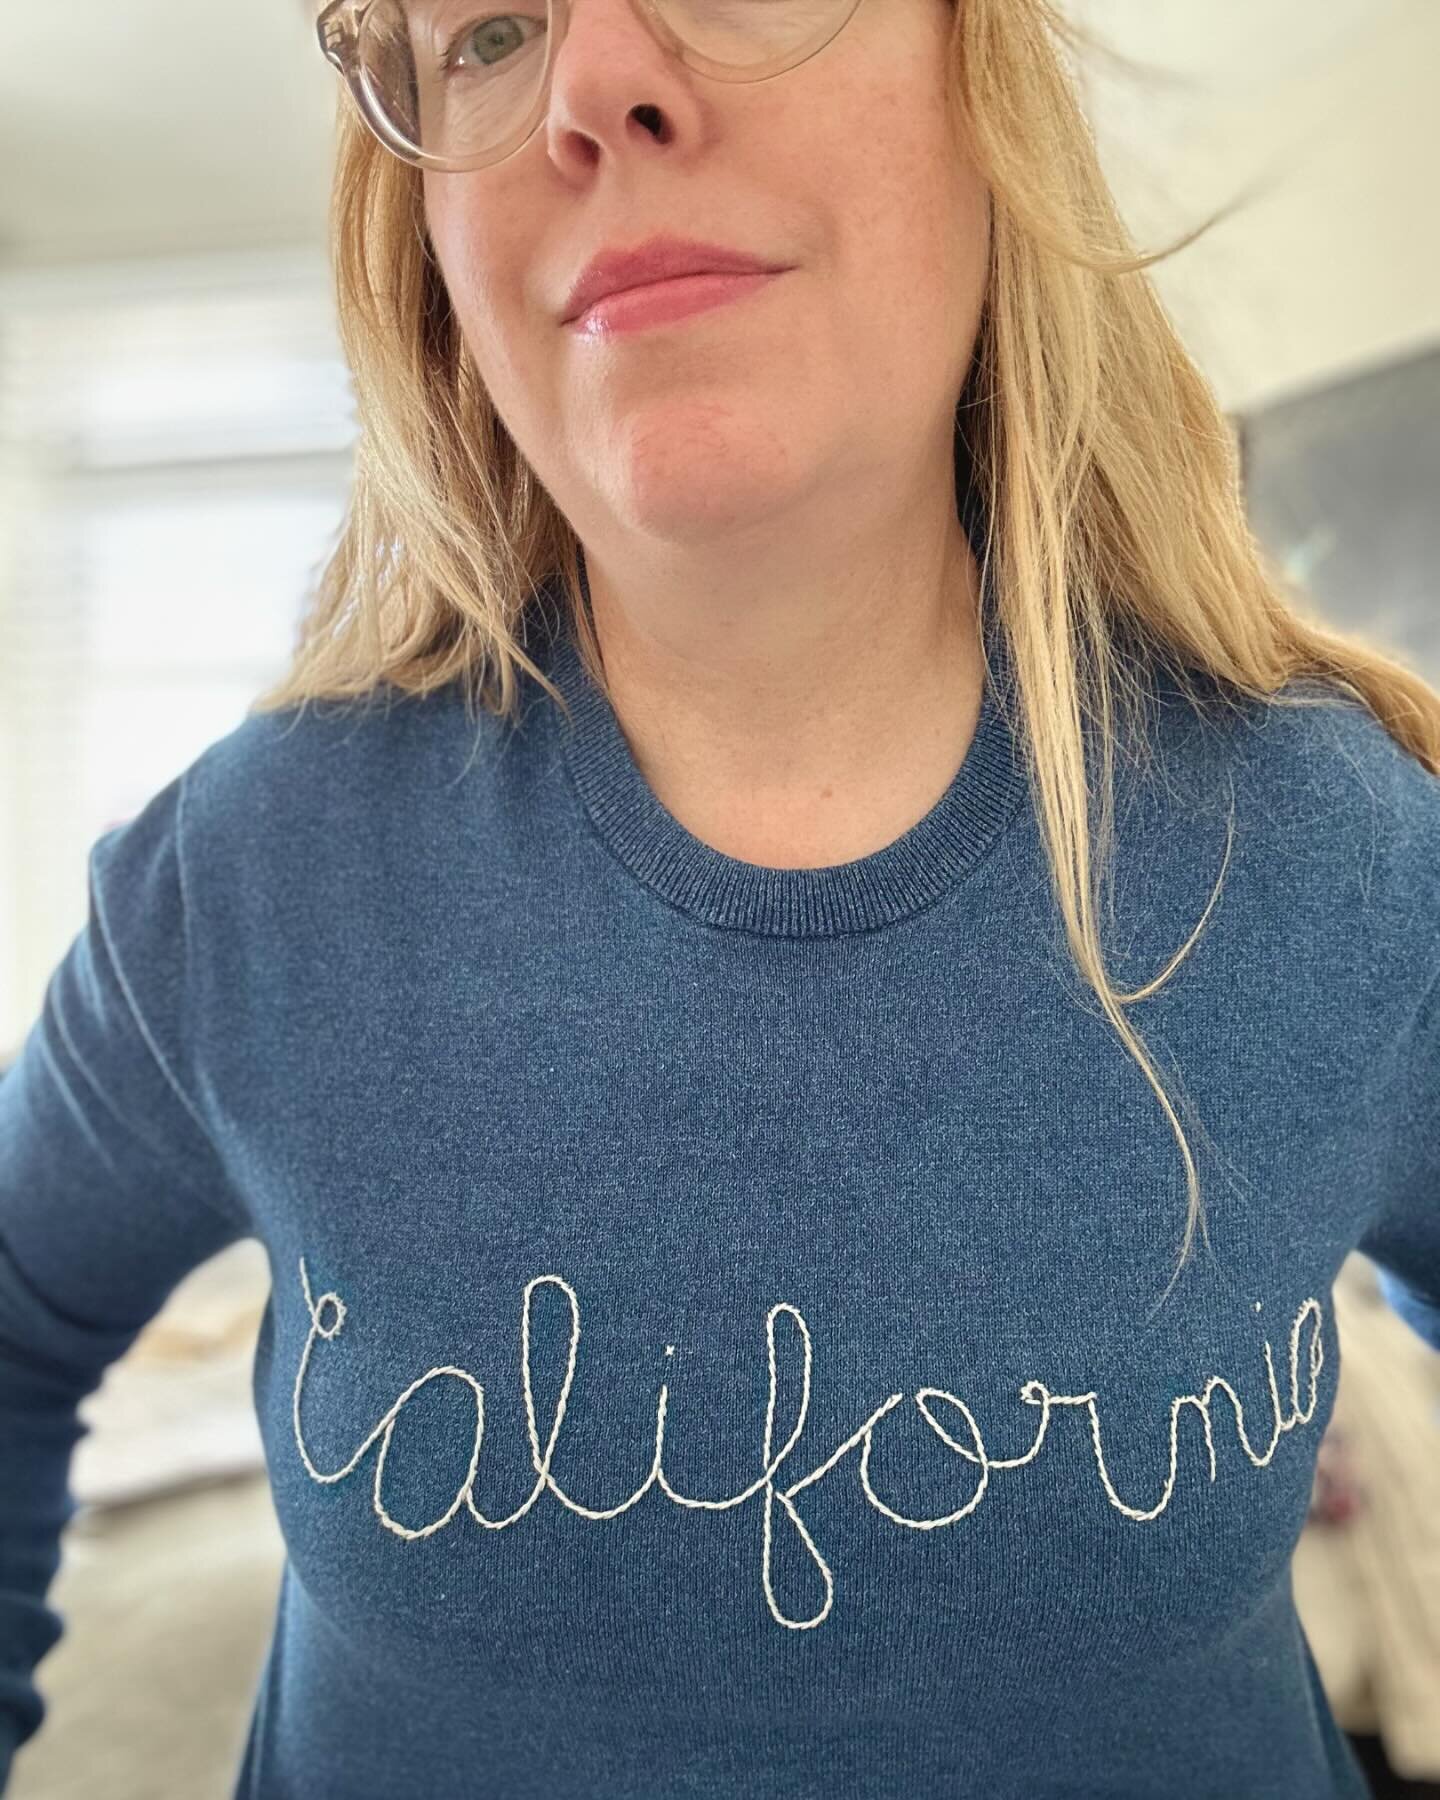 Are you coming to camp @workroomsocial? If you are, heads up that I&rsquo;ll be teaching an extra curricular activity - stem stitch lettering on your fav plain sweater ✌🏻